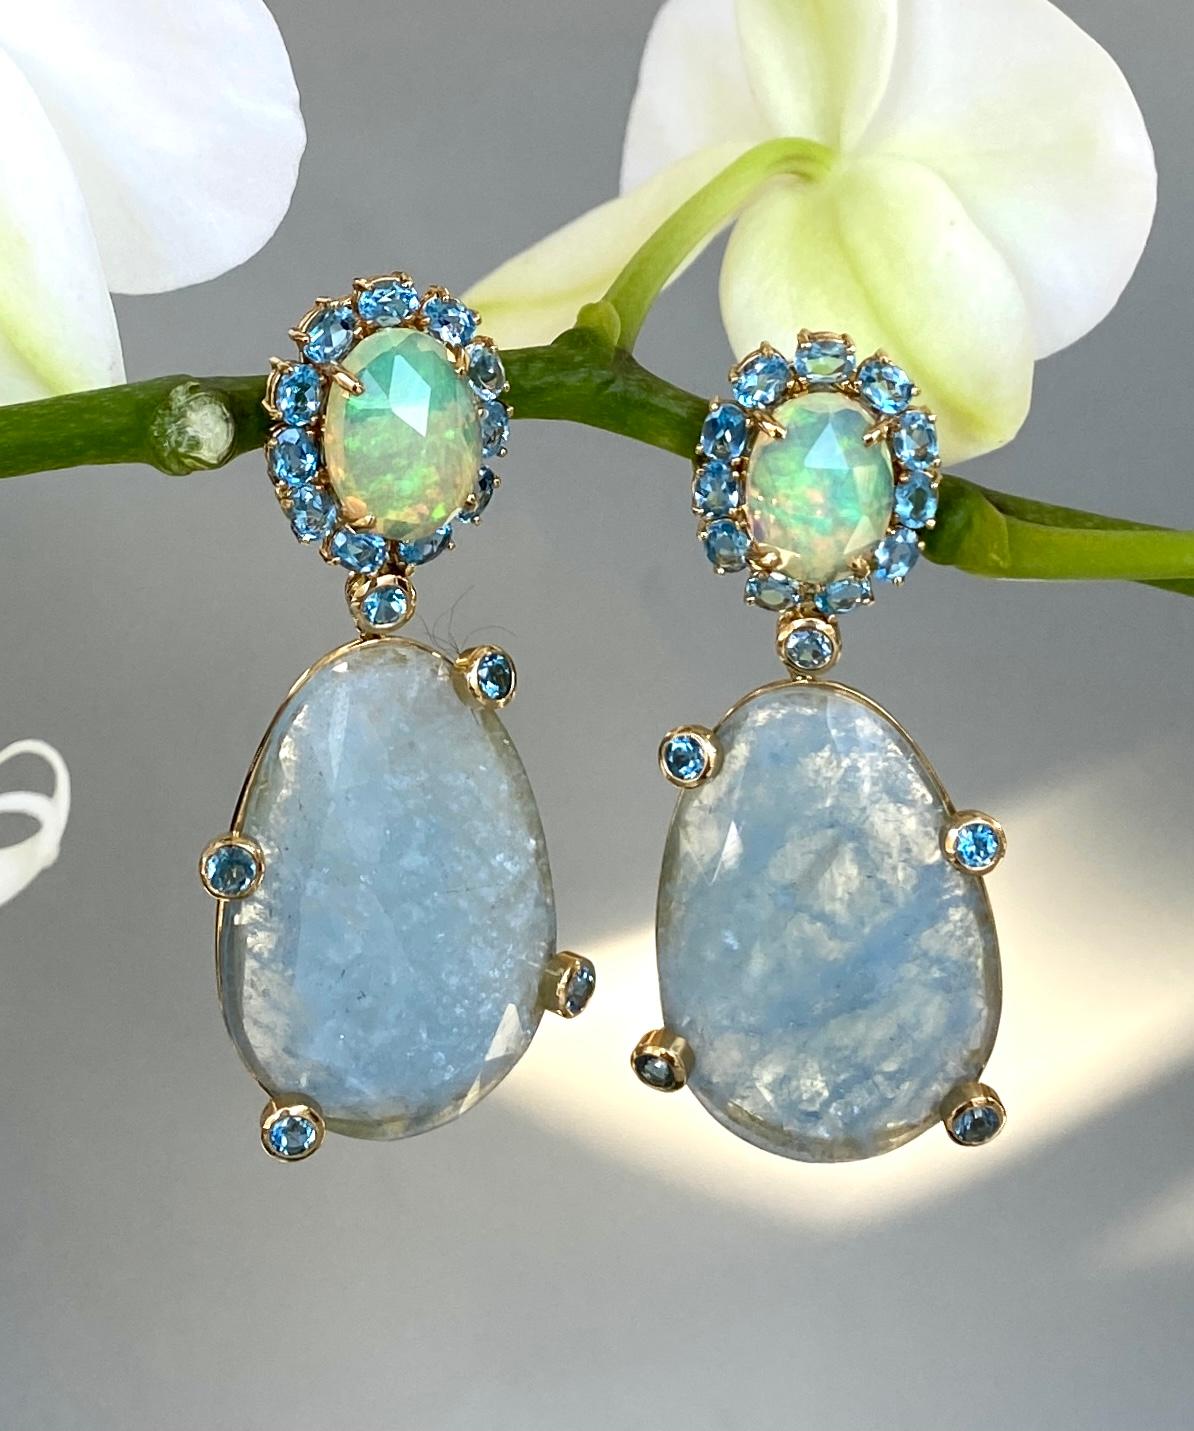 Exquisite drop dangle earrings of opals, blue topaz, and rose cut aquamarines, handcrafted in 18 karat yellow gold.

These one-of-a-kind earrings are in subtle shades of baby blue aquamarines and shimmering greenish-blue opals, with vibrant blue